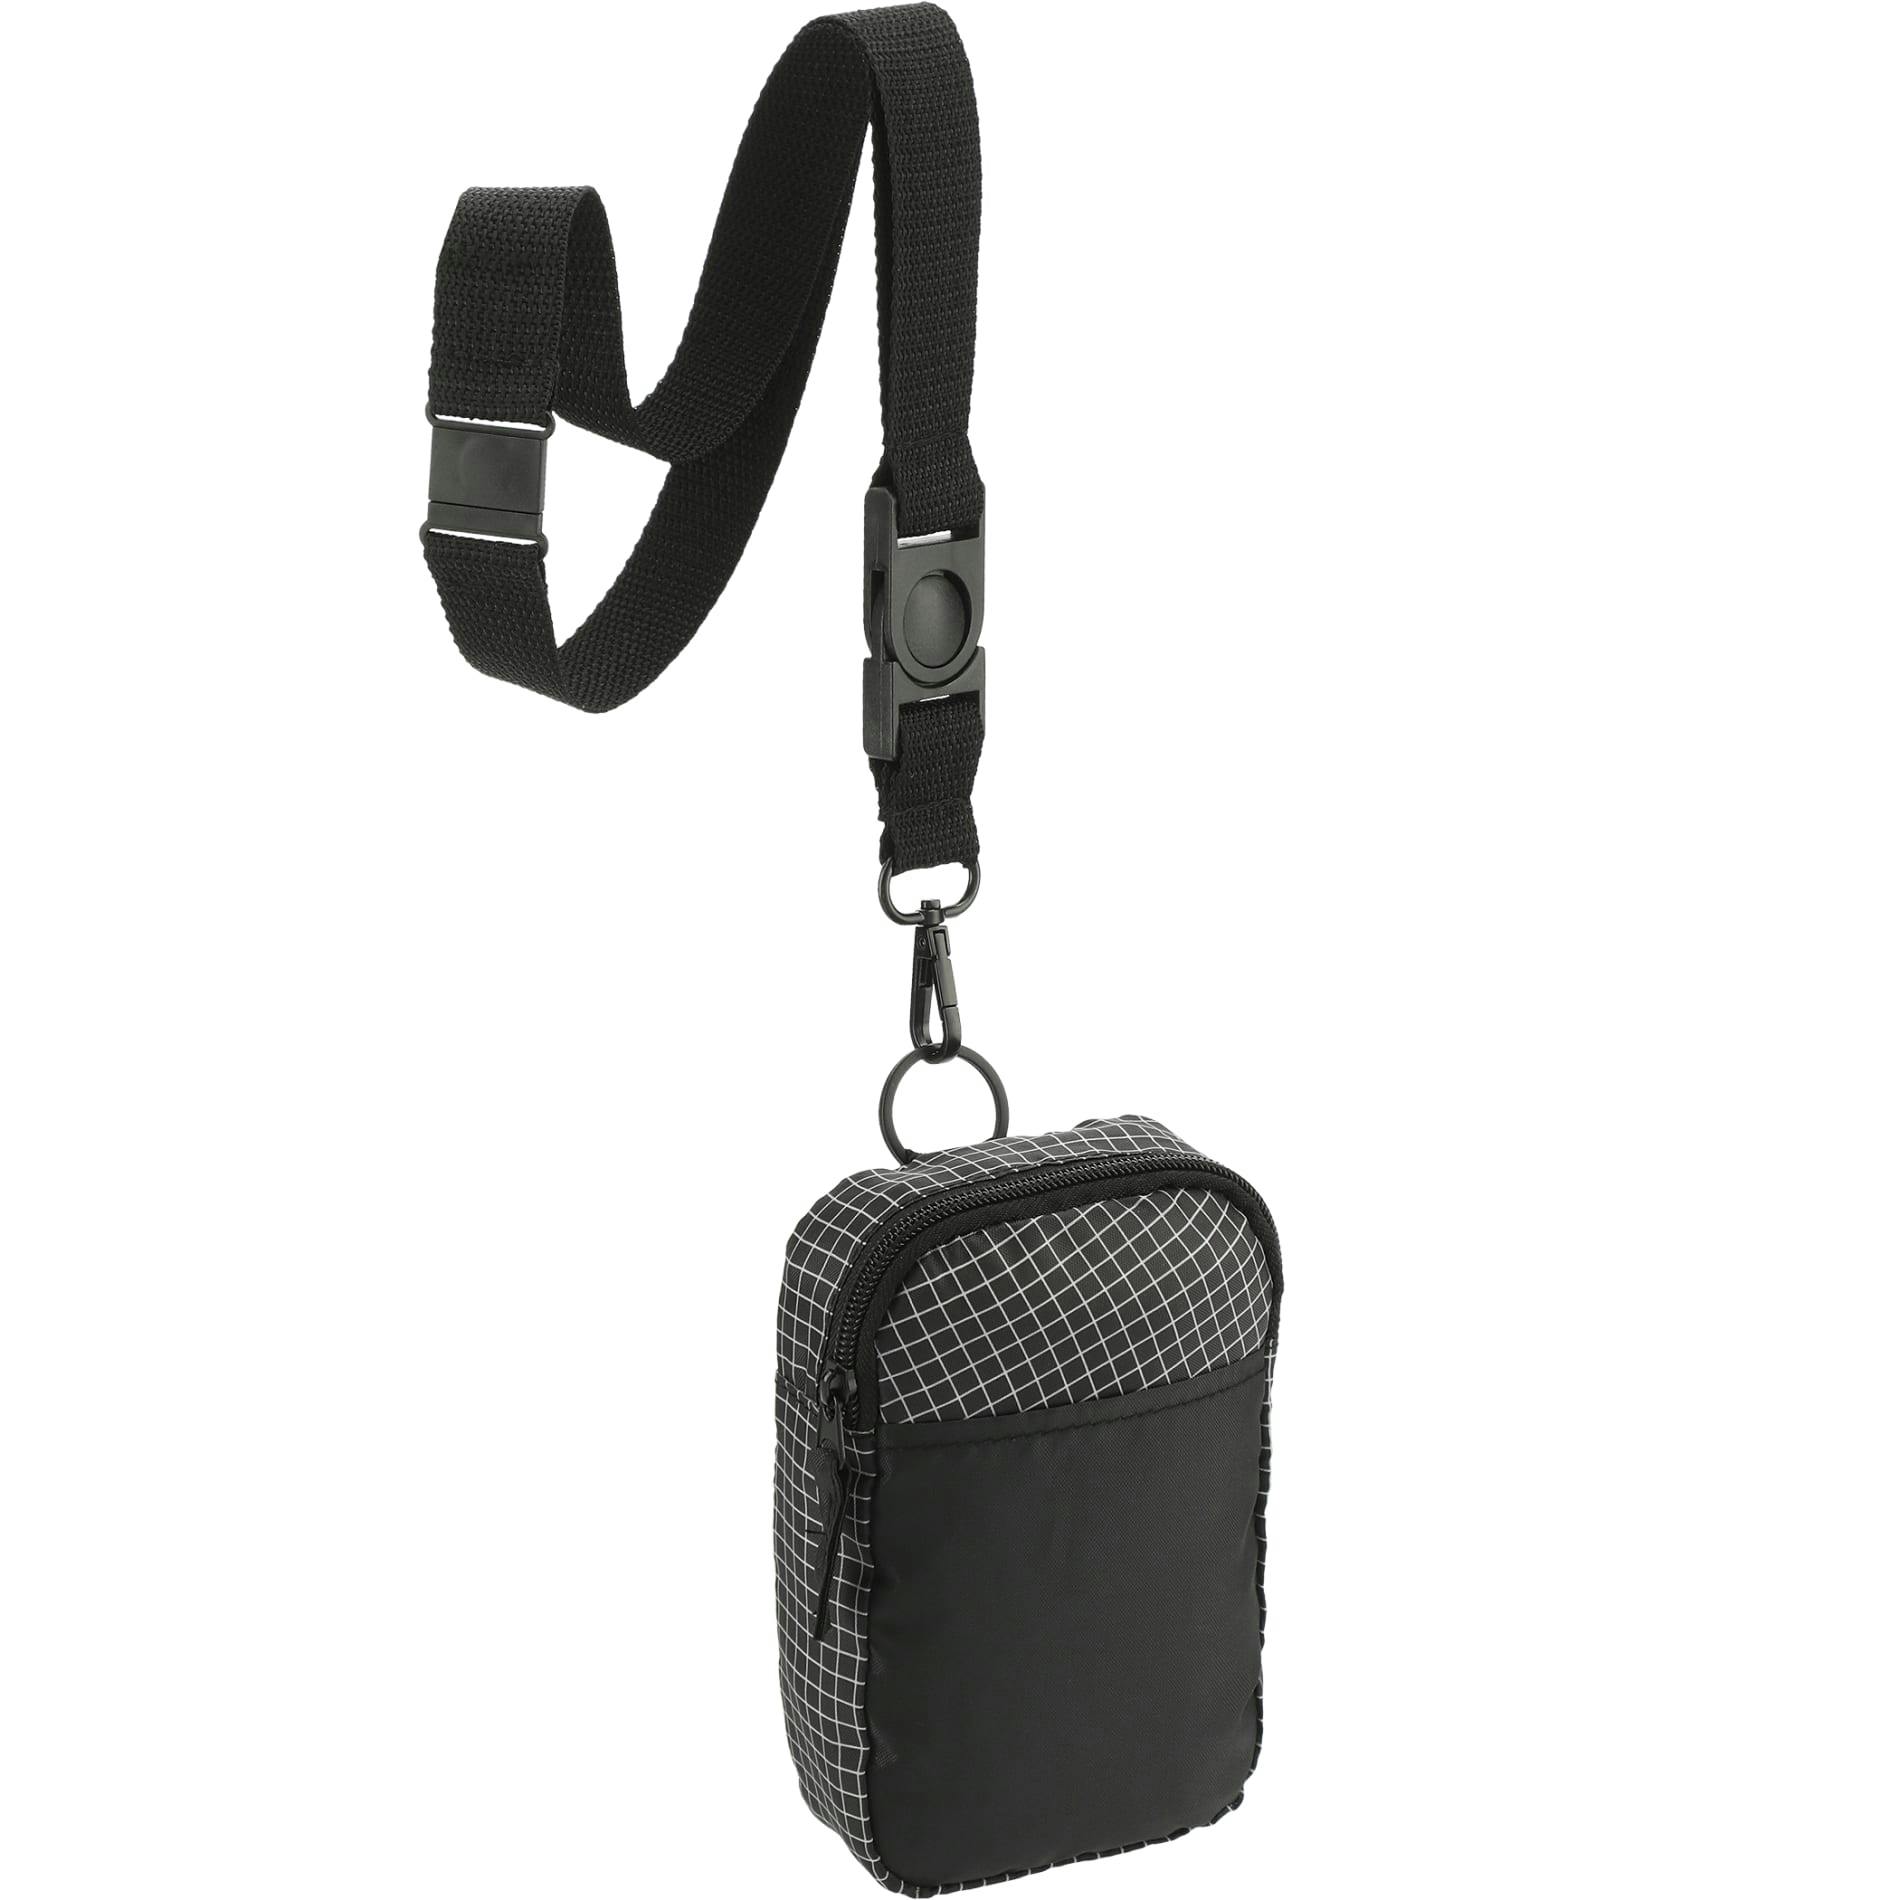 Grid Lanyard Phone Pouch - additional Image 3